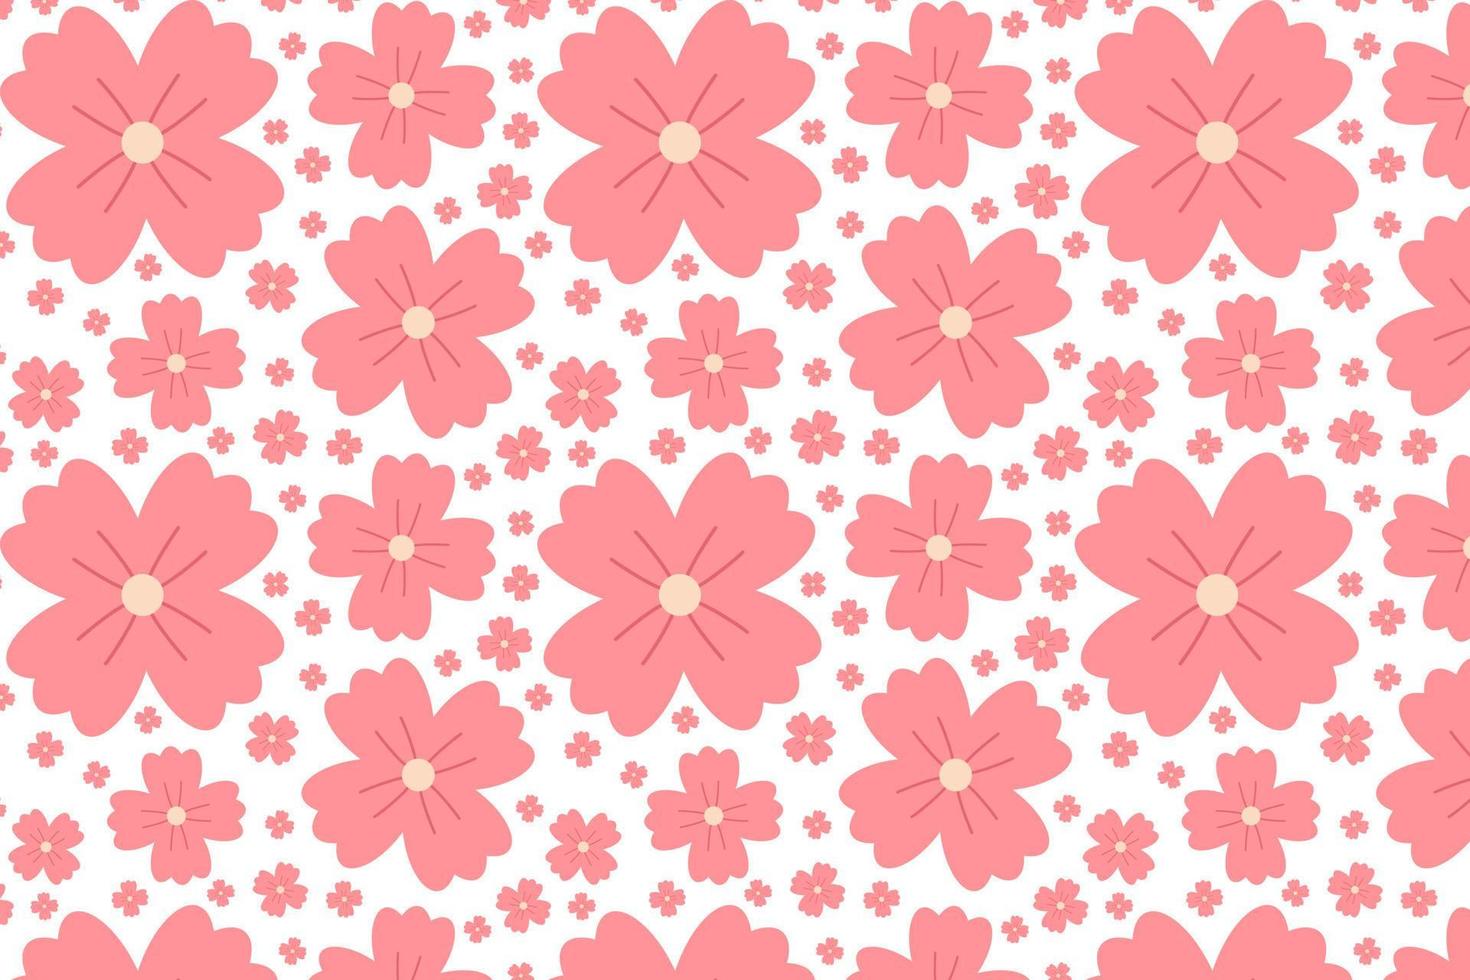 Seamless spring floral pattern with cute pink flowers. Beautiful flower with four petals. Botanical ornament. Nature background for fabric, textiles, paper, clothing. Vector flat cartoon illustration